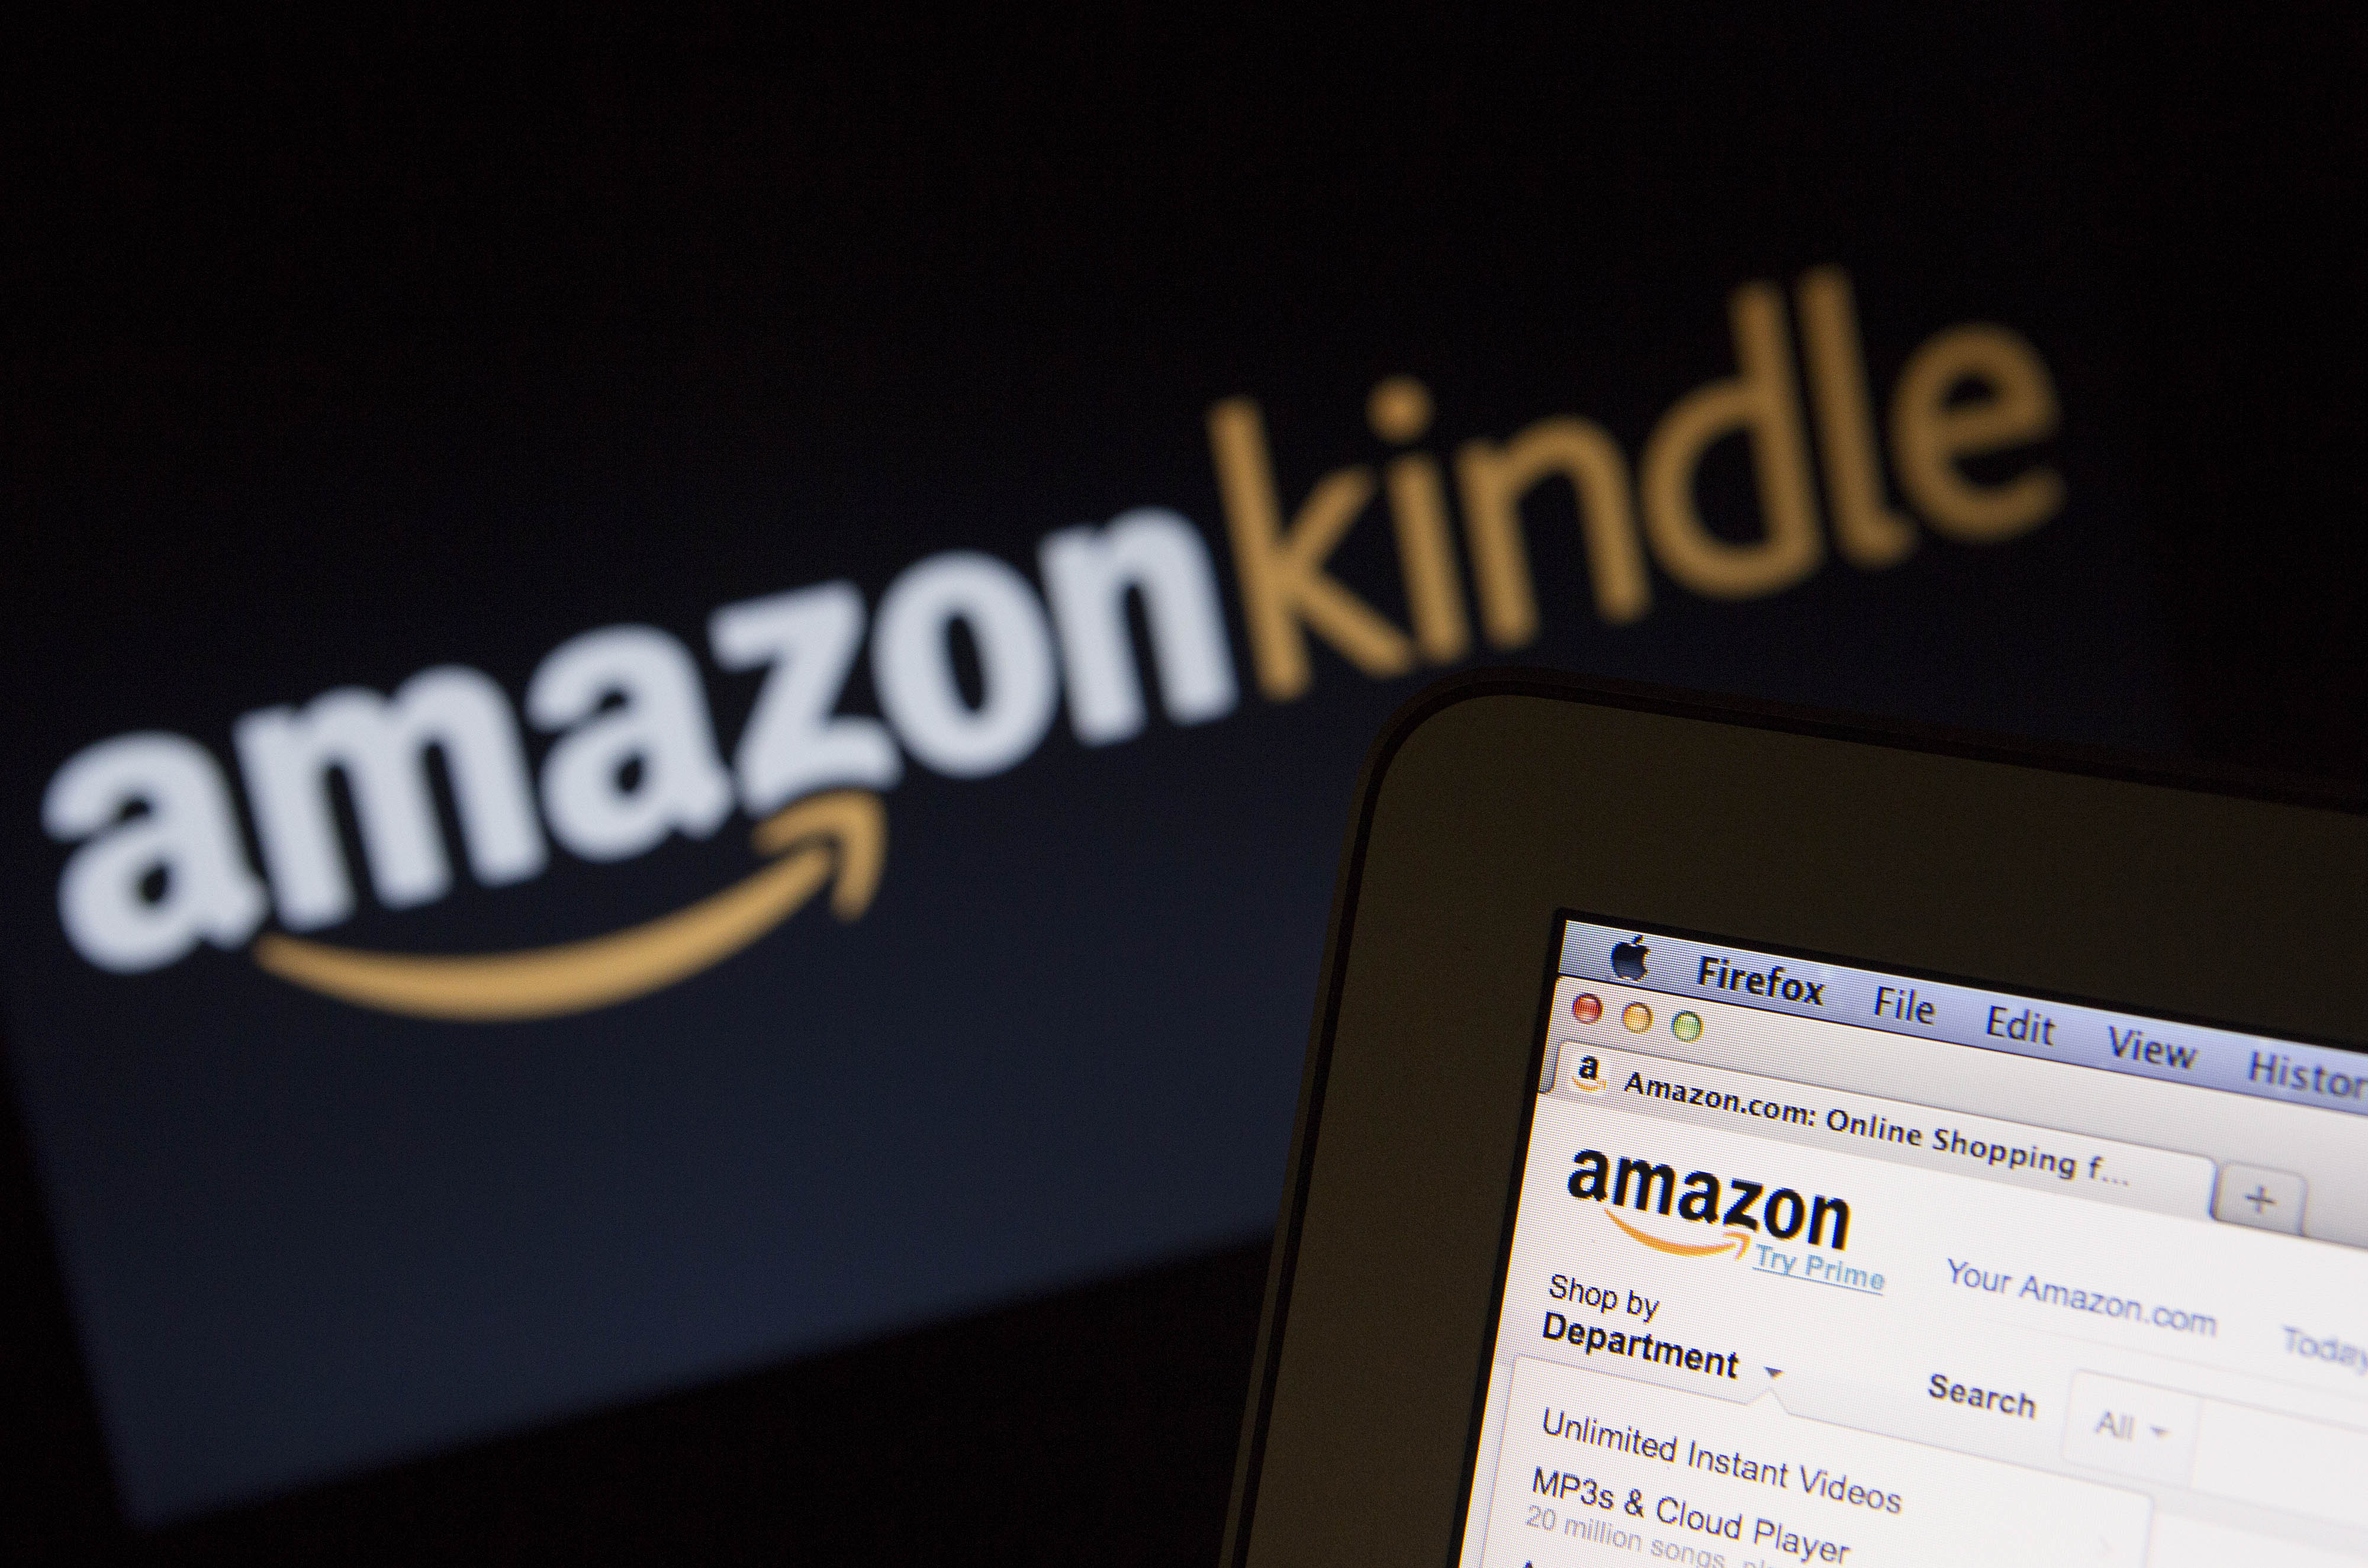 The Amazon.com Inc. homepage and Amazon Kindle logo are displayed on laptop computers in Washington, D.C., U.S., on Wednesday, Oct. 23, 2013. (Andrew Harrer—Bloomberg/Getty Images)